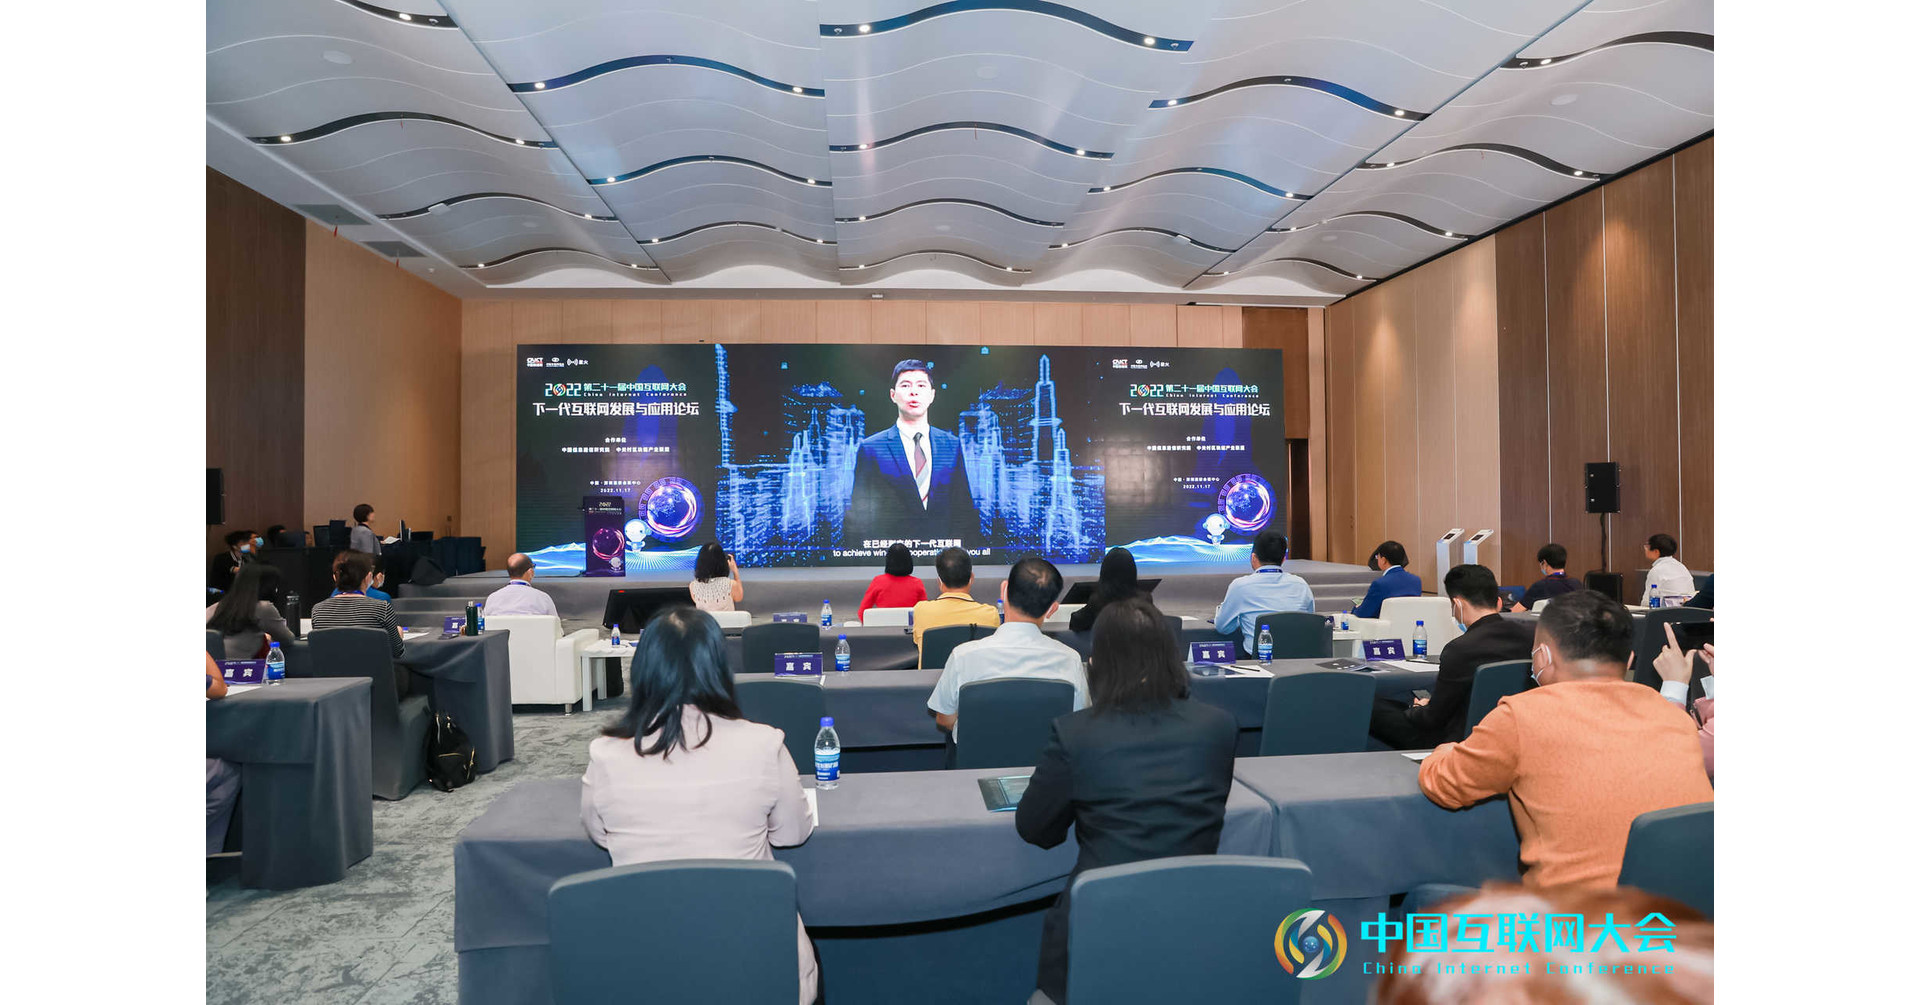 China national blockchain Xinghuo BIF appoints MyEG to own and operate Xinghuo International Supernode to connect China blockchain to global markets